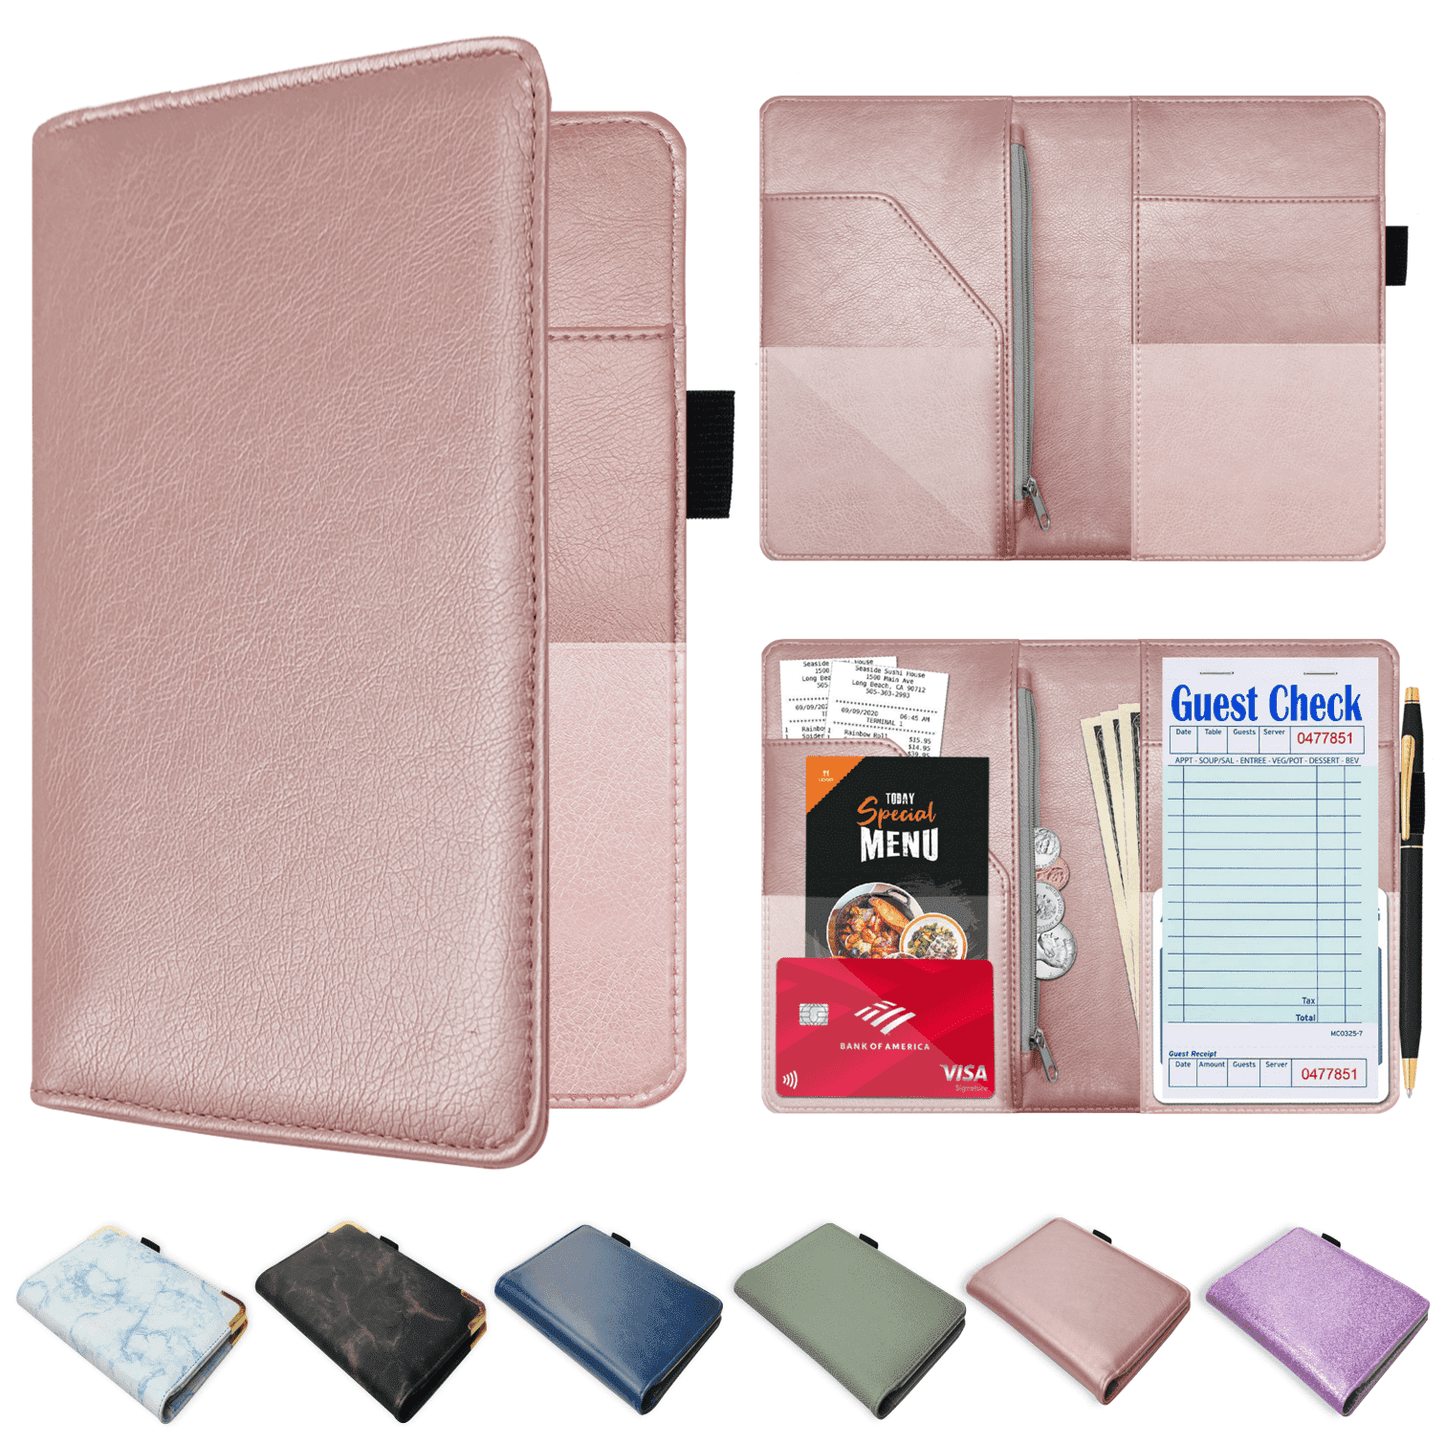 PU Leather Server Book for Waitress